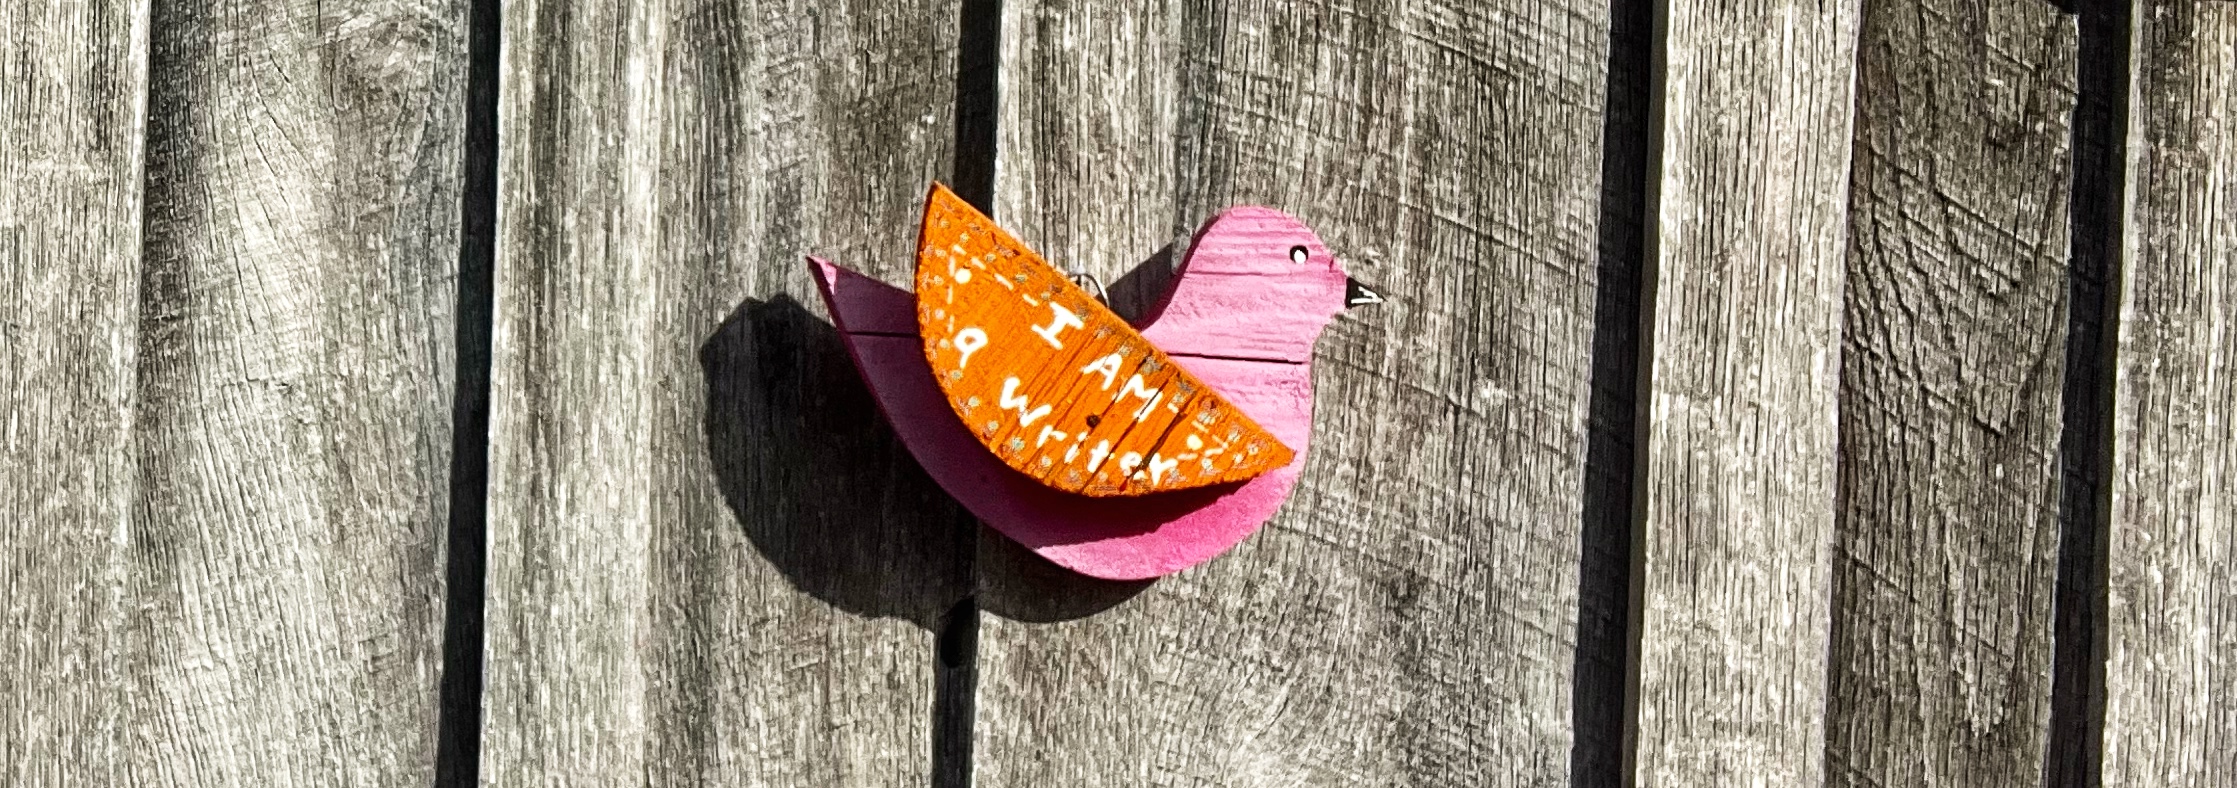 A wooden bird with "I am a writer" painted on its wing.